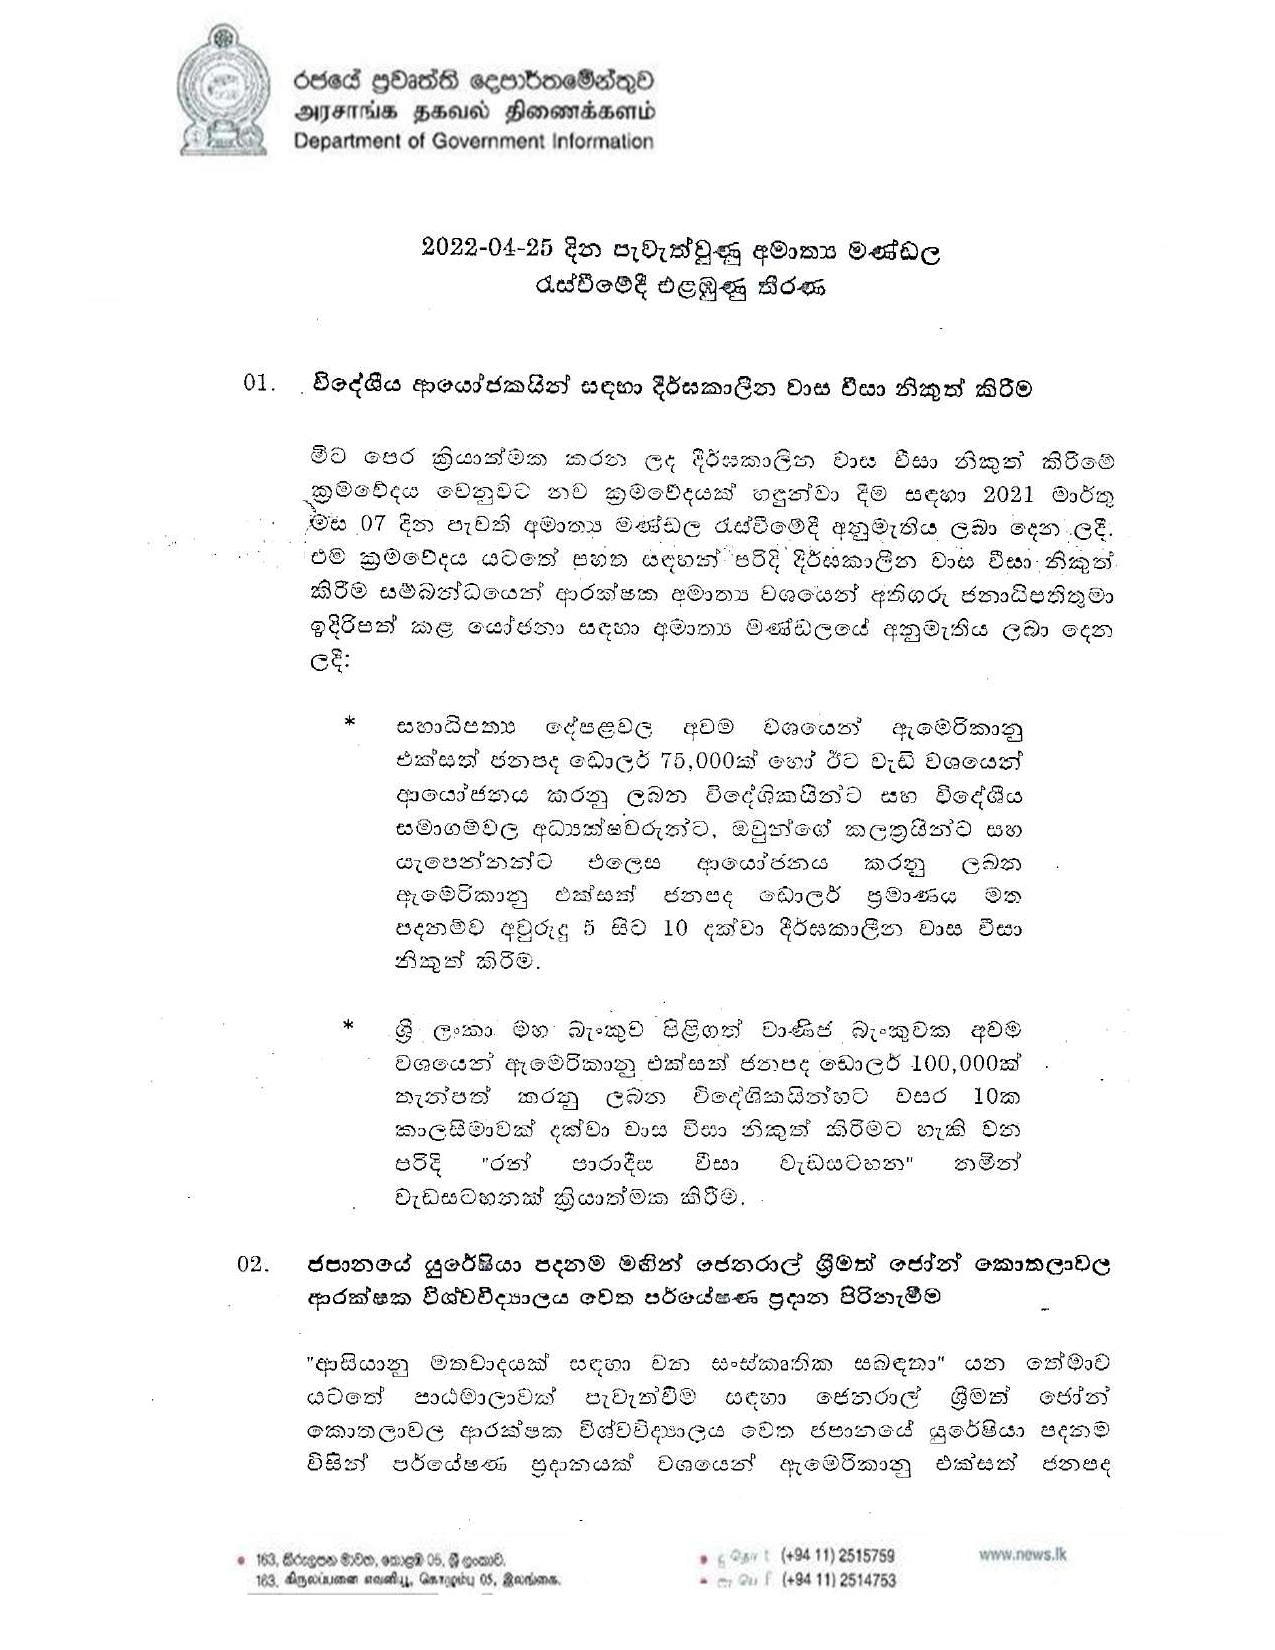 Cabinet Press Breifing on 25.04.2022 page 001